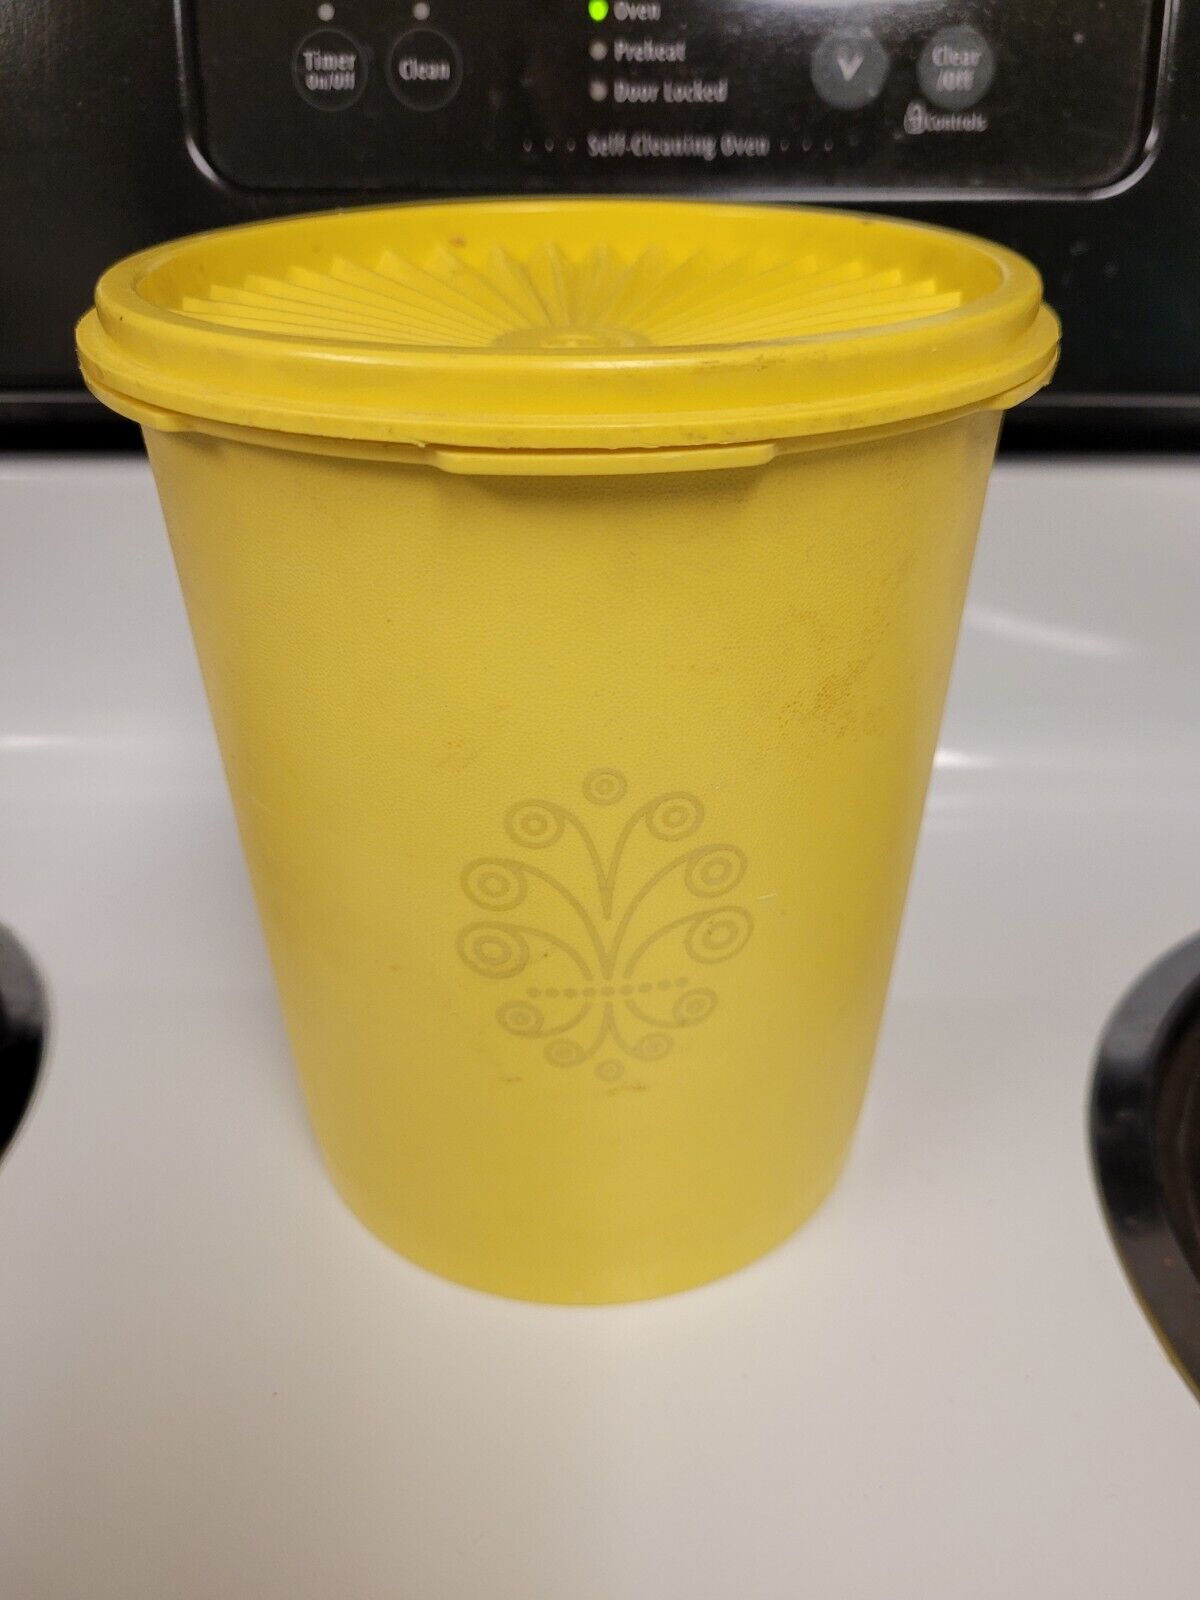 Vintage Tupperware Yellow Flour Canister Midcentury Modern USA Excellent Cond.